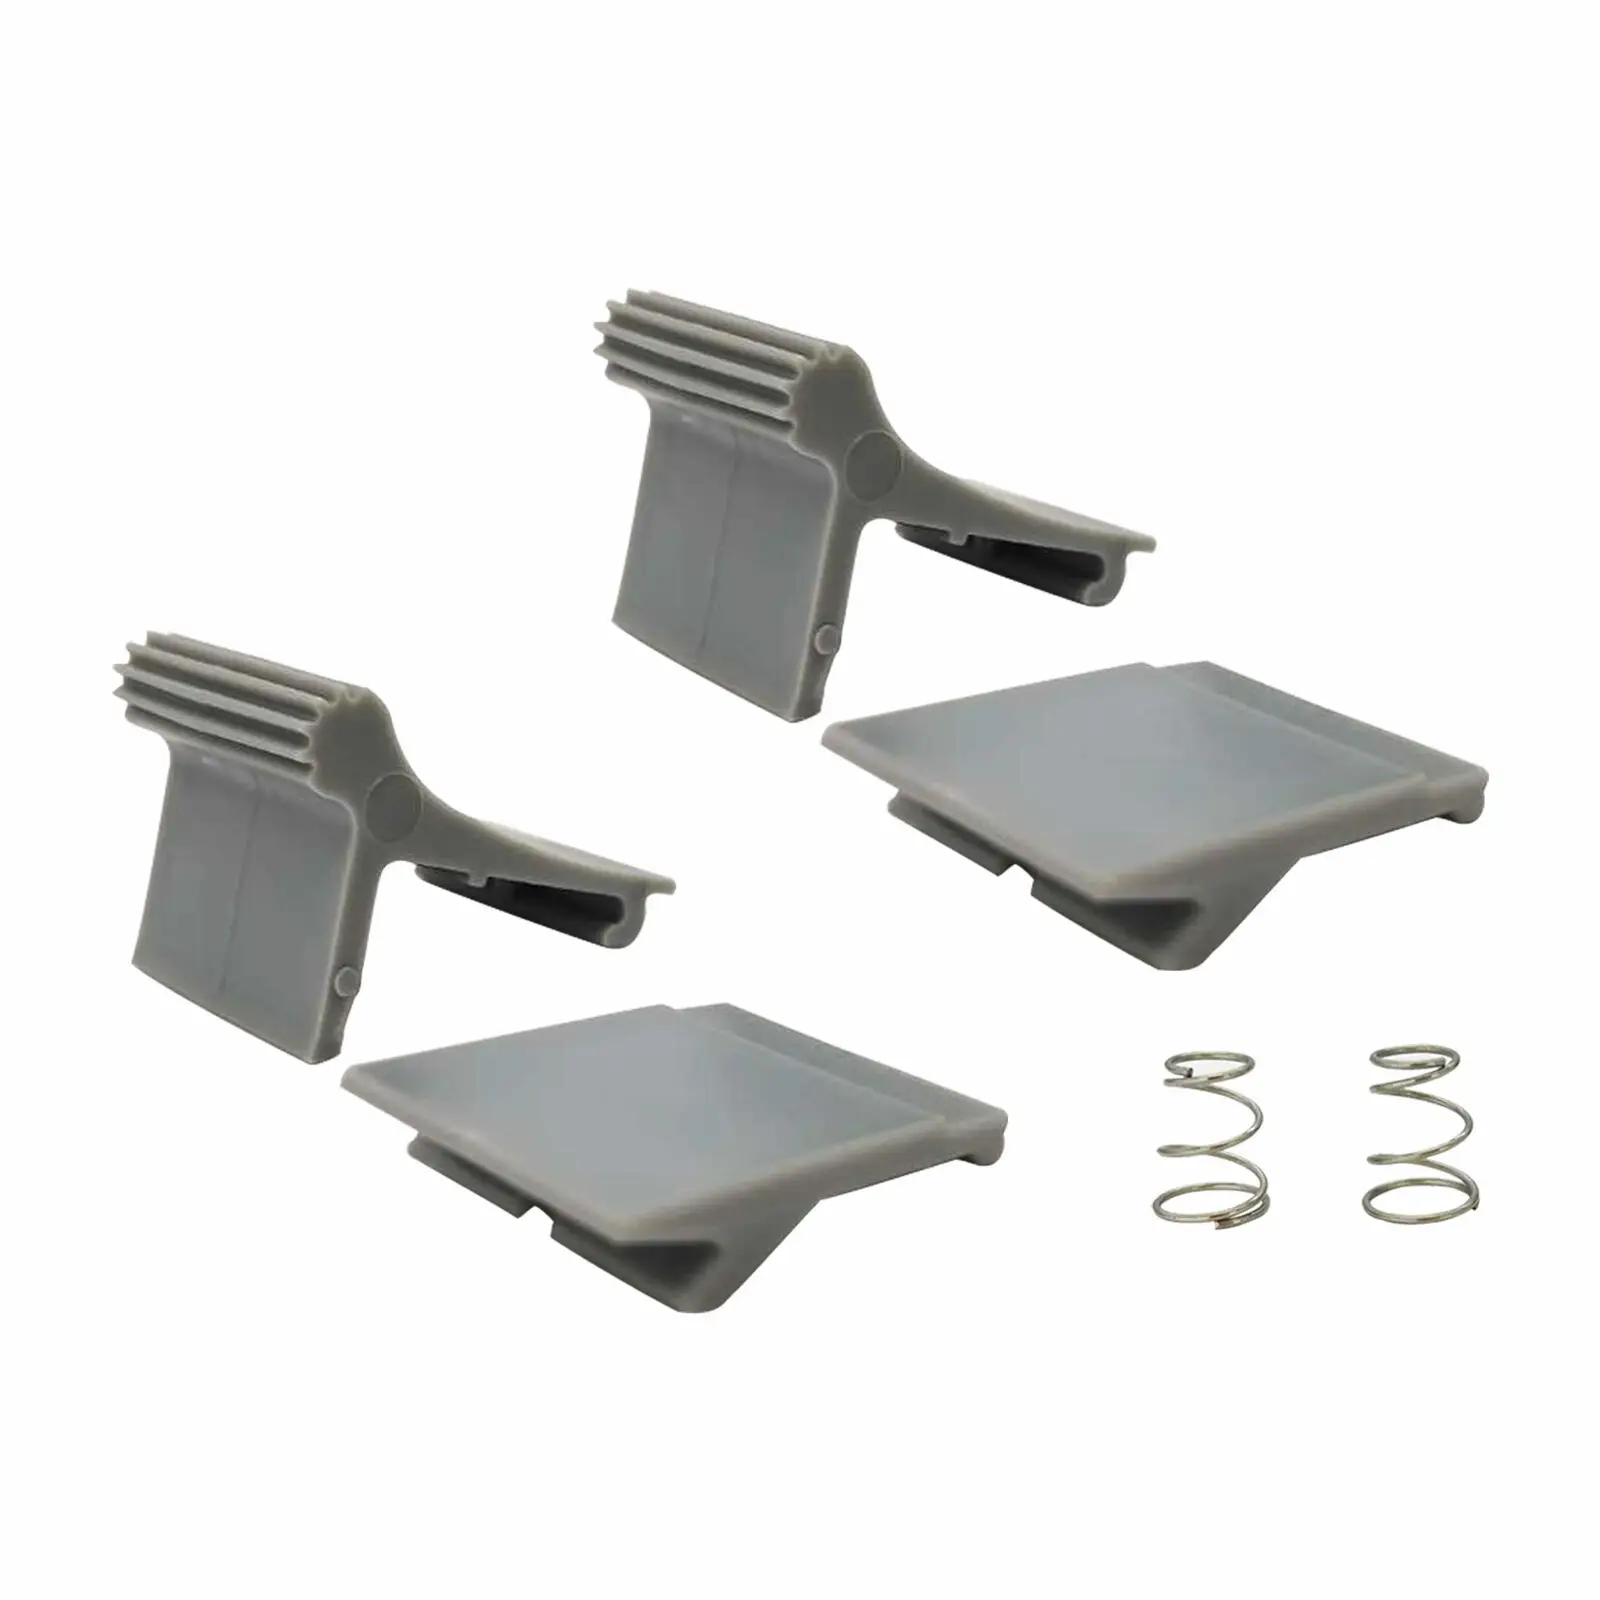 830472P002 RV Patio Awning Slider Catch patio retractable side awning 160 x 300 cm grey